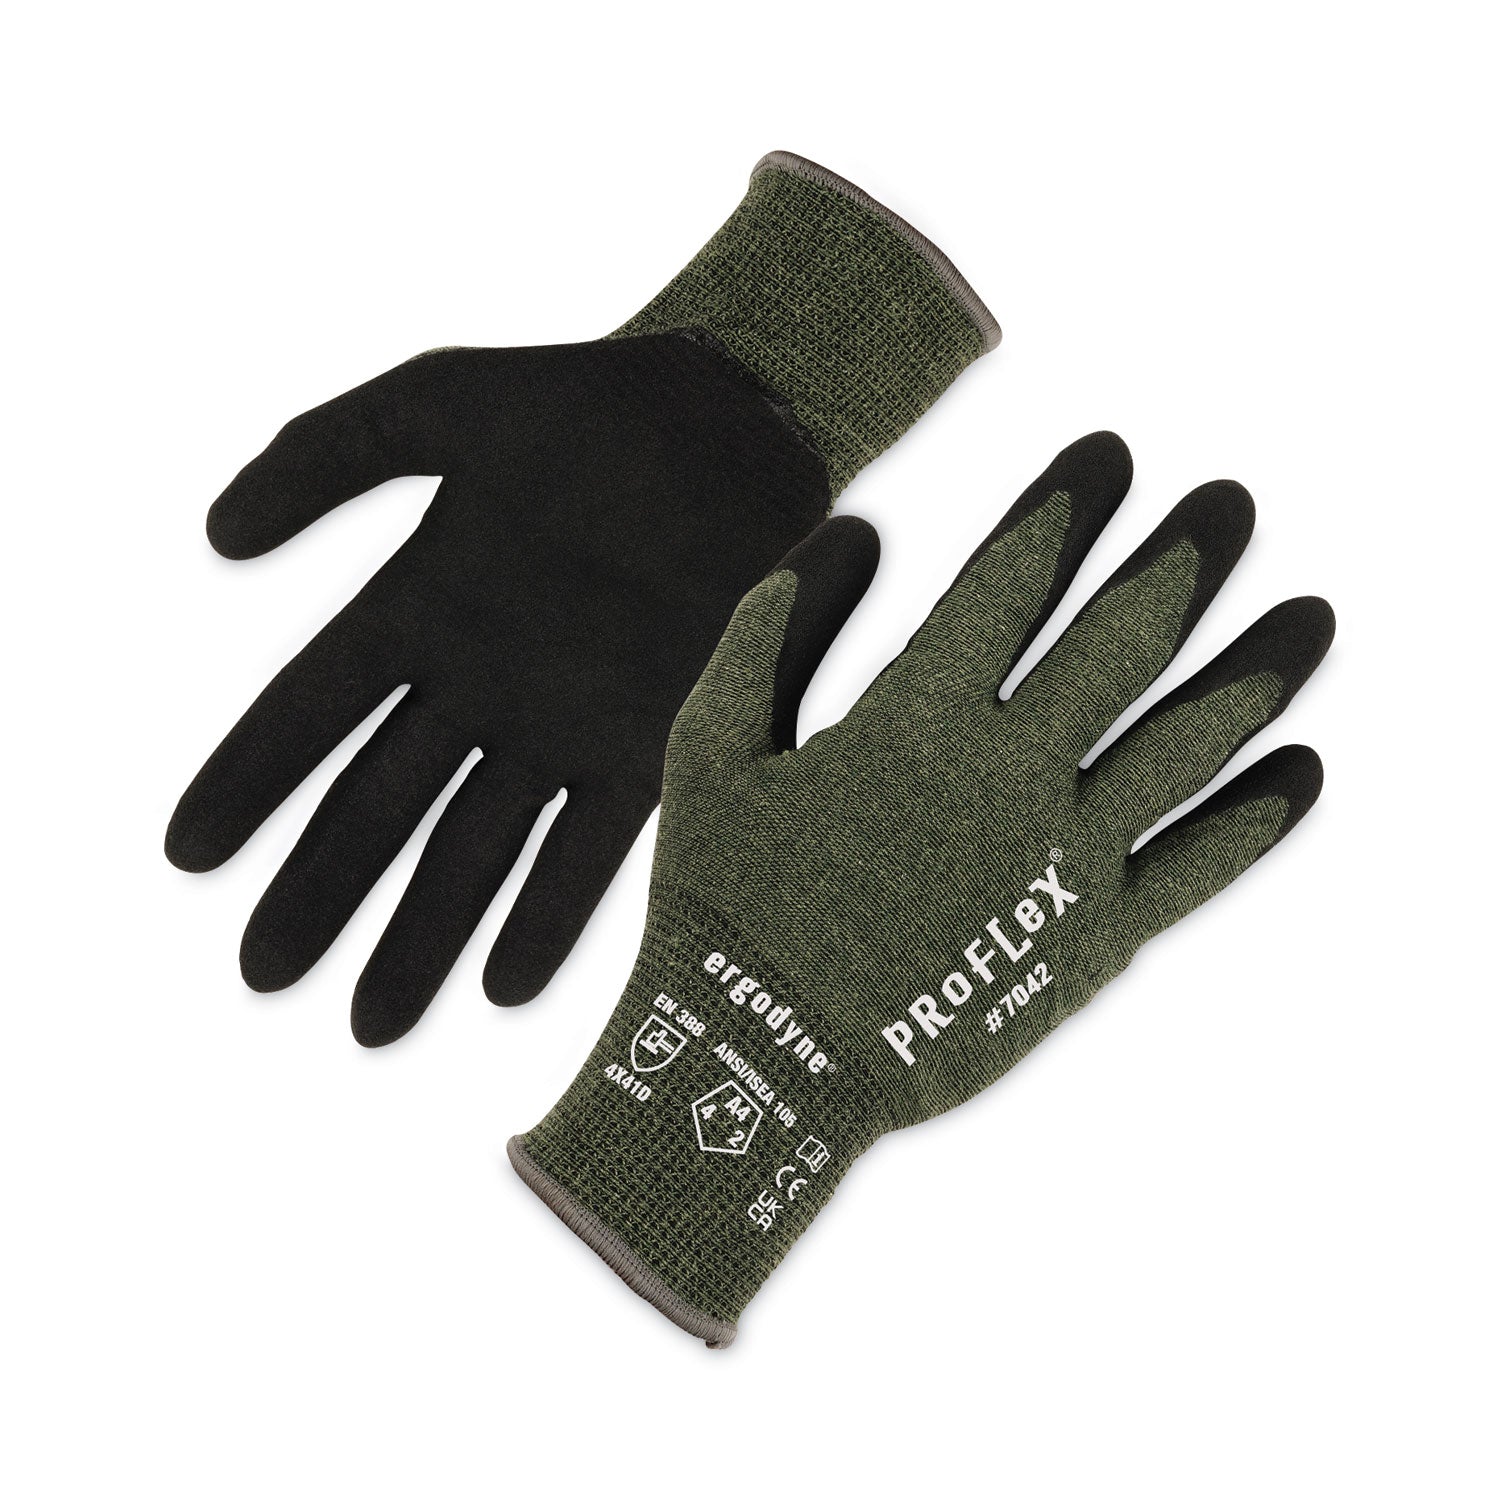 proflex-7042-ansi-a4-nitrile-coated-cr-gloves-green-small-pair-ships-in-1-3-business-days_ego10342 - 1